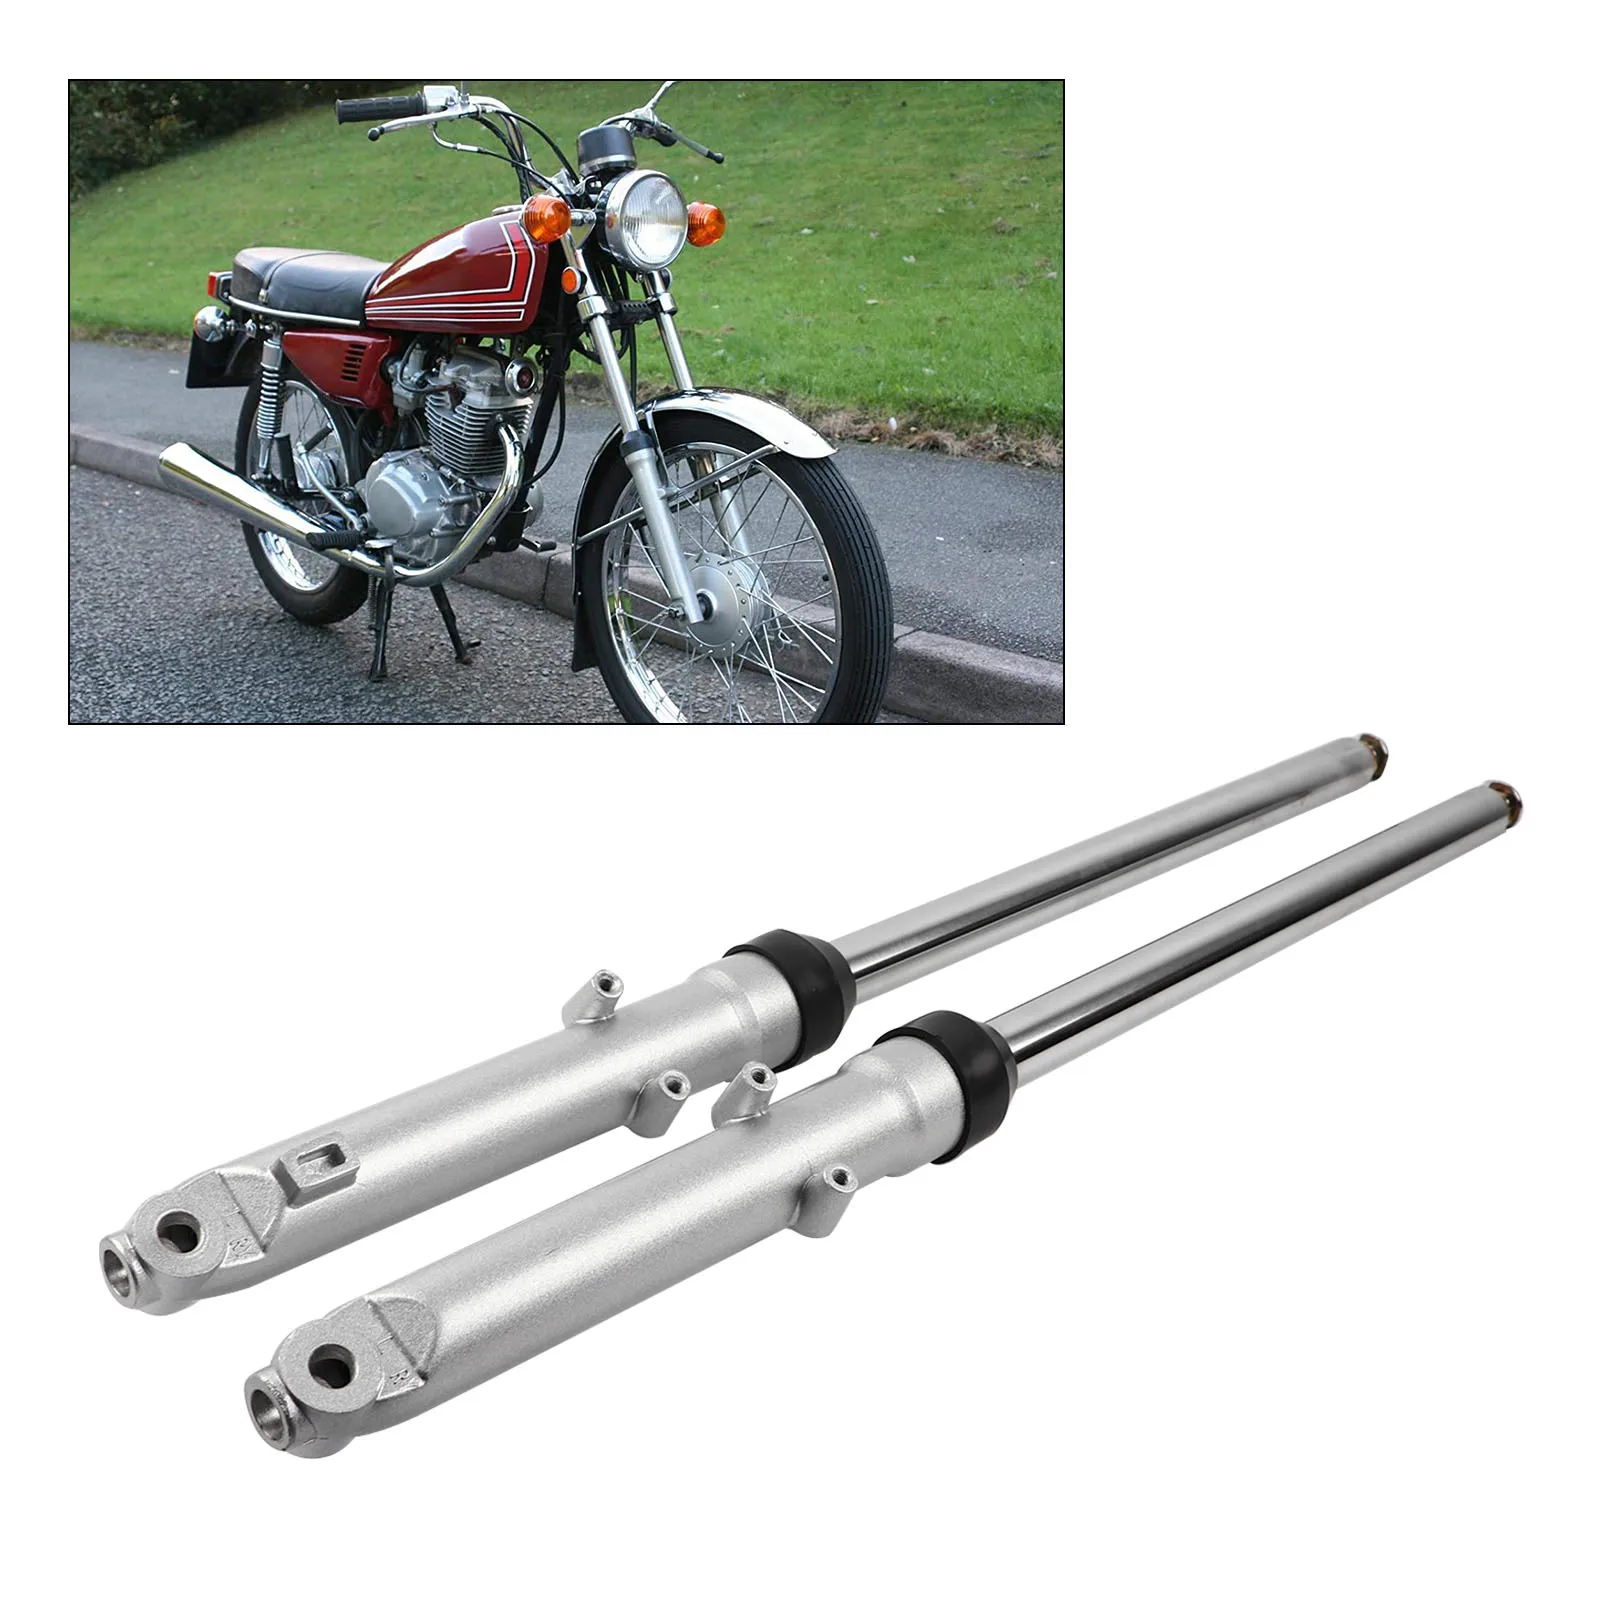 1 Pair 27 Motorcycle Front Fork Tubes Shocks Suspension Oil Absorber Replacement for Honda CG125 CT90 CT110 Trail 